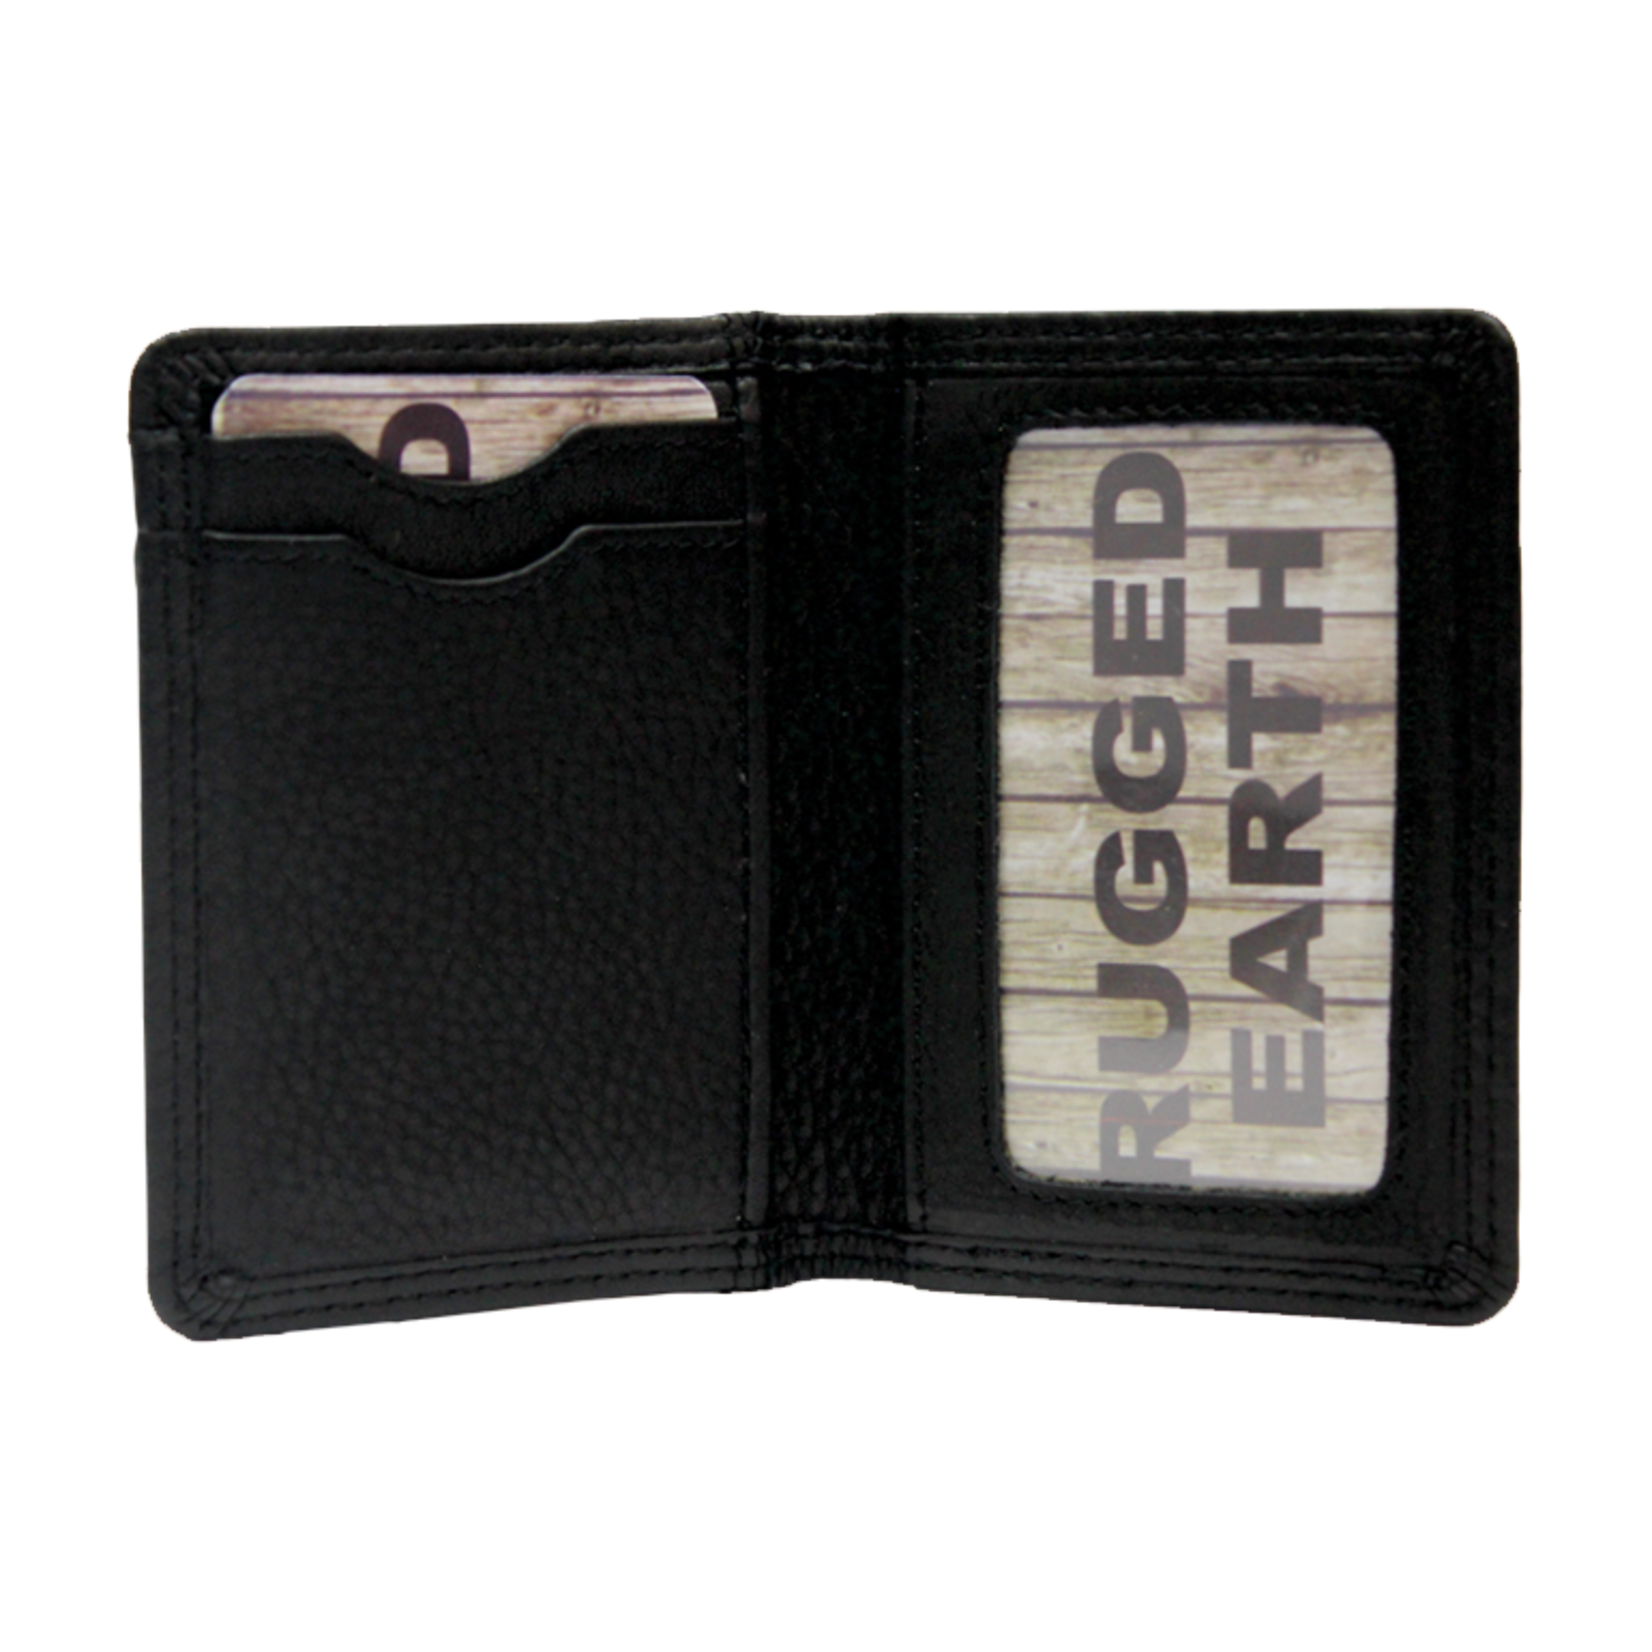 Rugged Earth Leather Credit Card Wallet